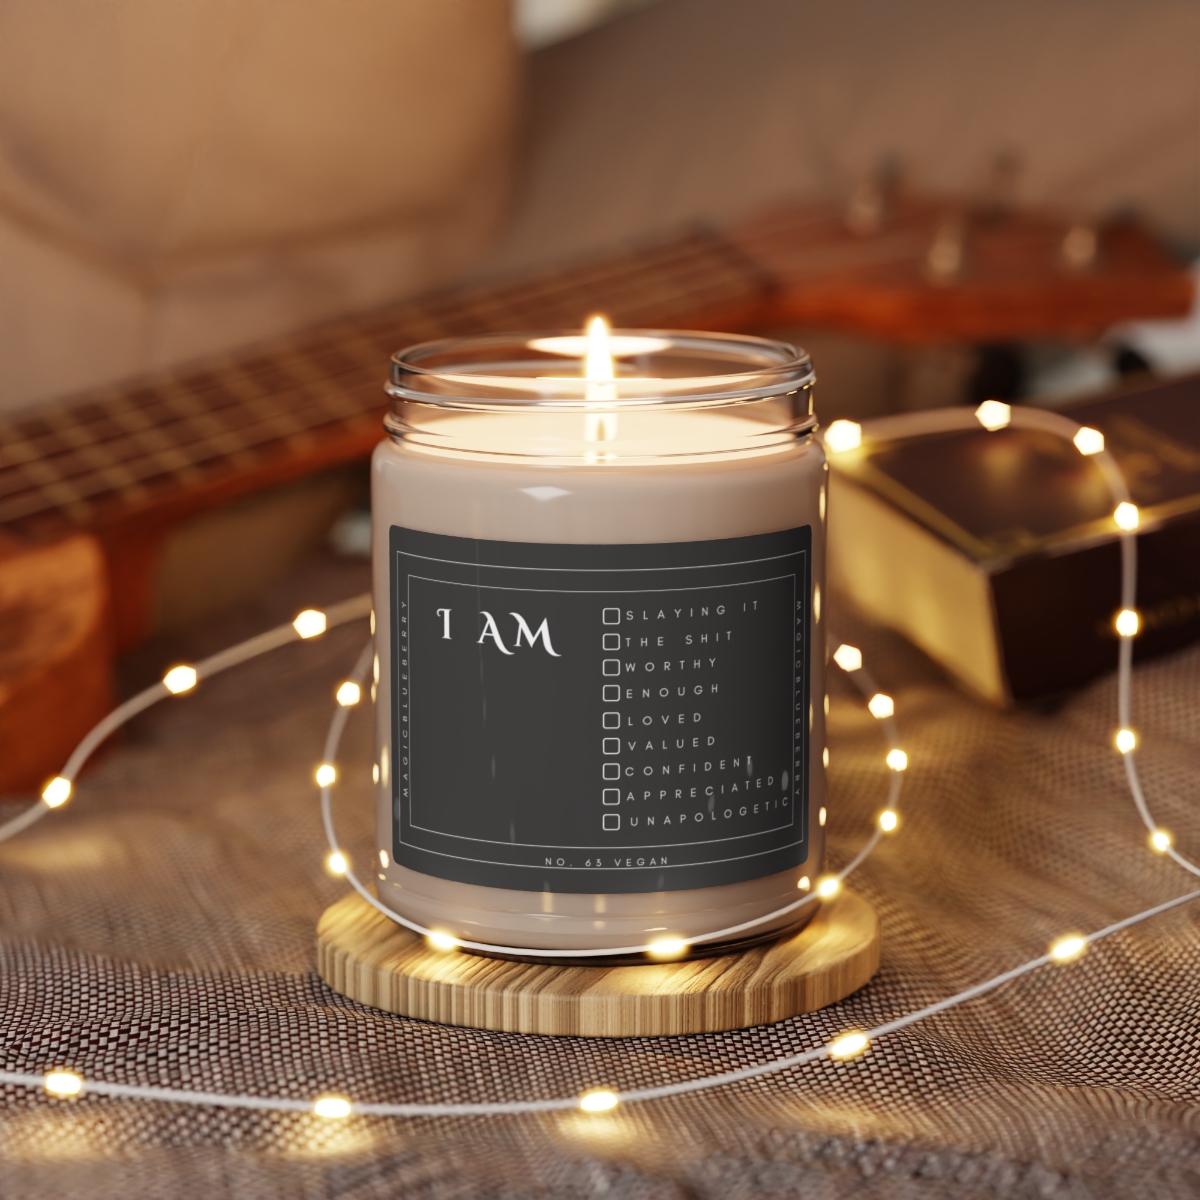 I AM, Scented Vegan Soy Wax Candles, Clear Jar Candle, Spell Candles, Sassy Candle, Vegan Candle, Cotton Wick Candle, Home Deco product main image